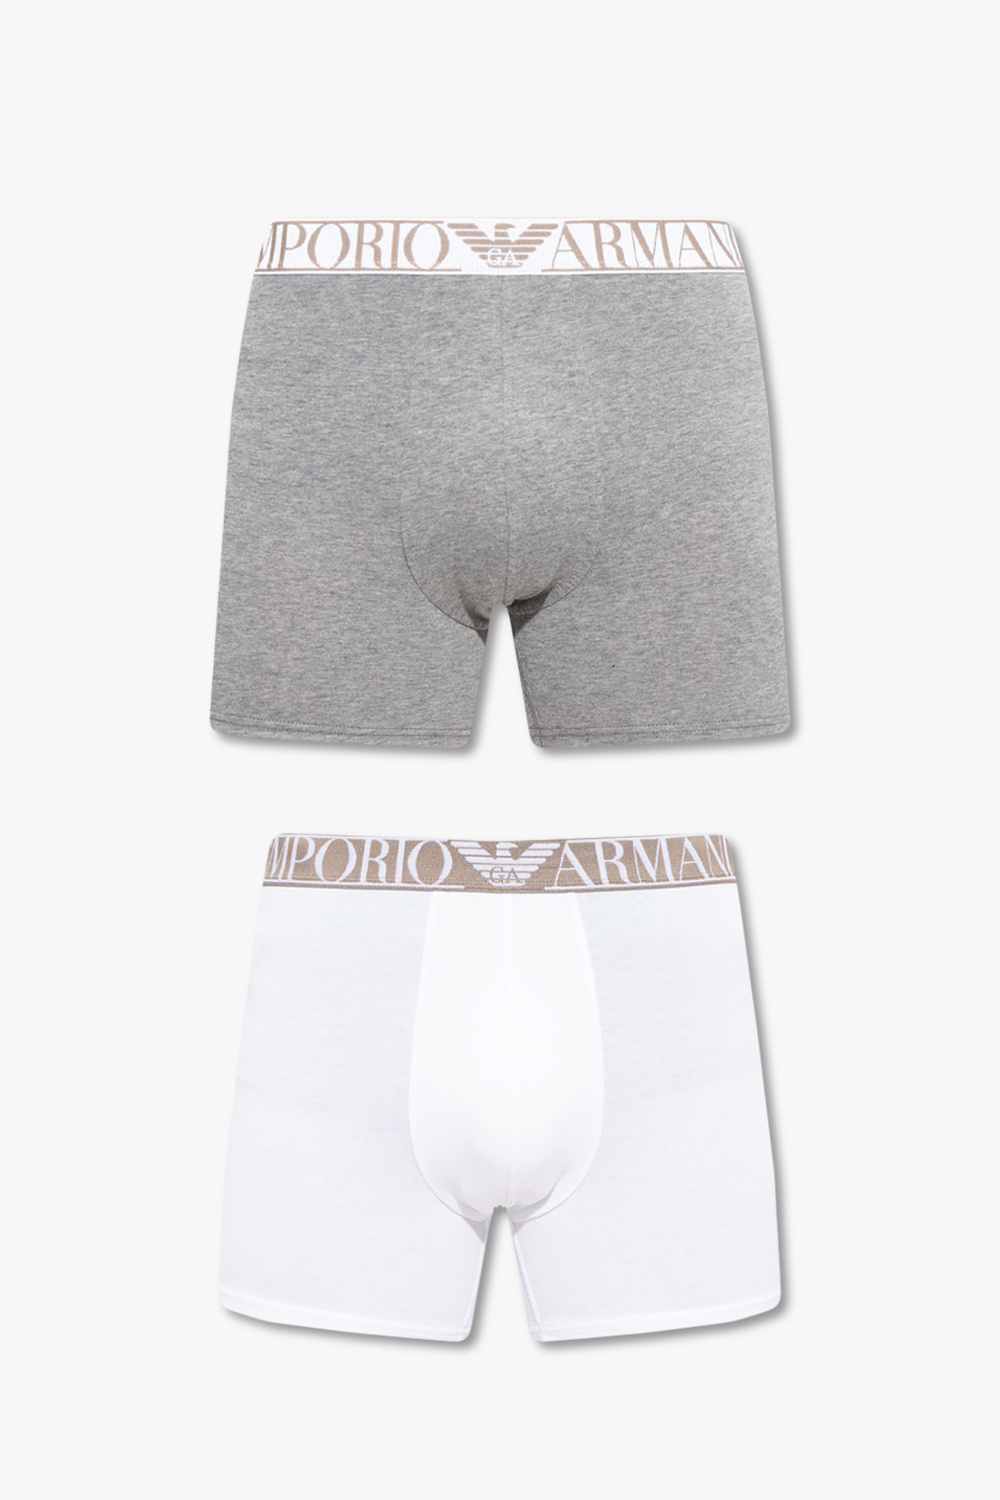 Emporio armani sneakersy Boxers two-pack